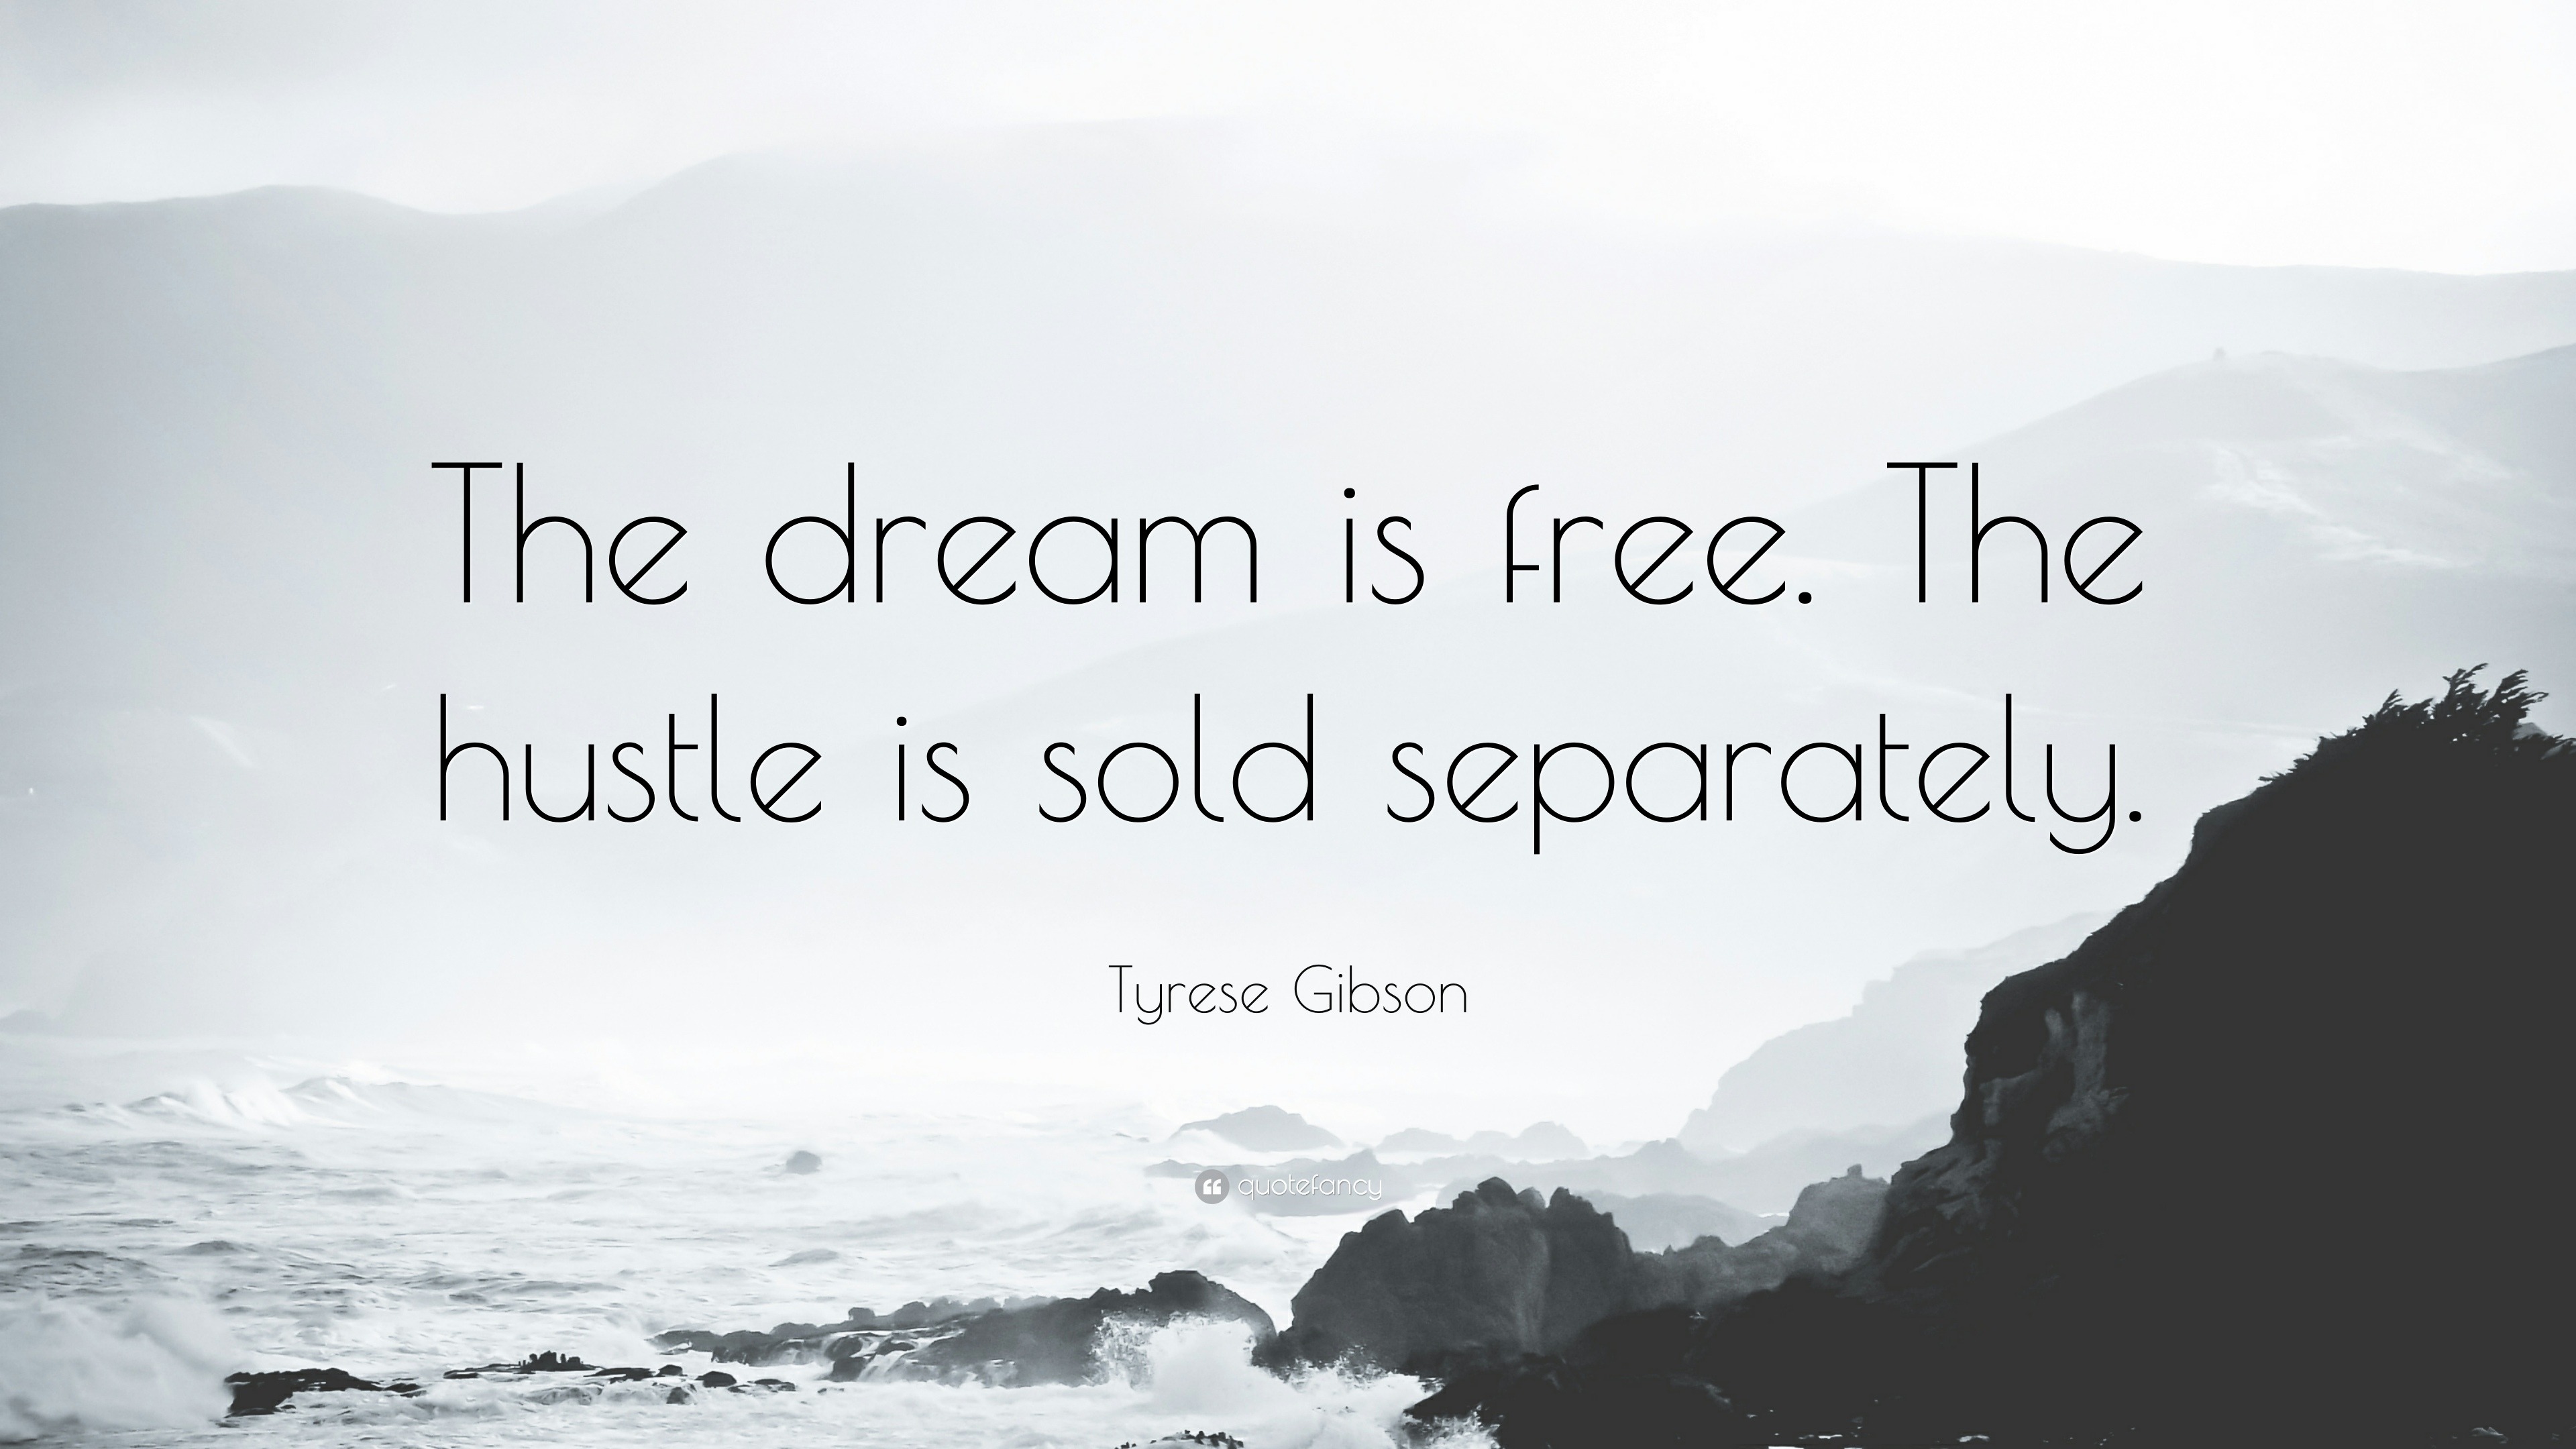 The dream is free the hustle is sold separately